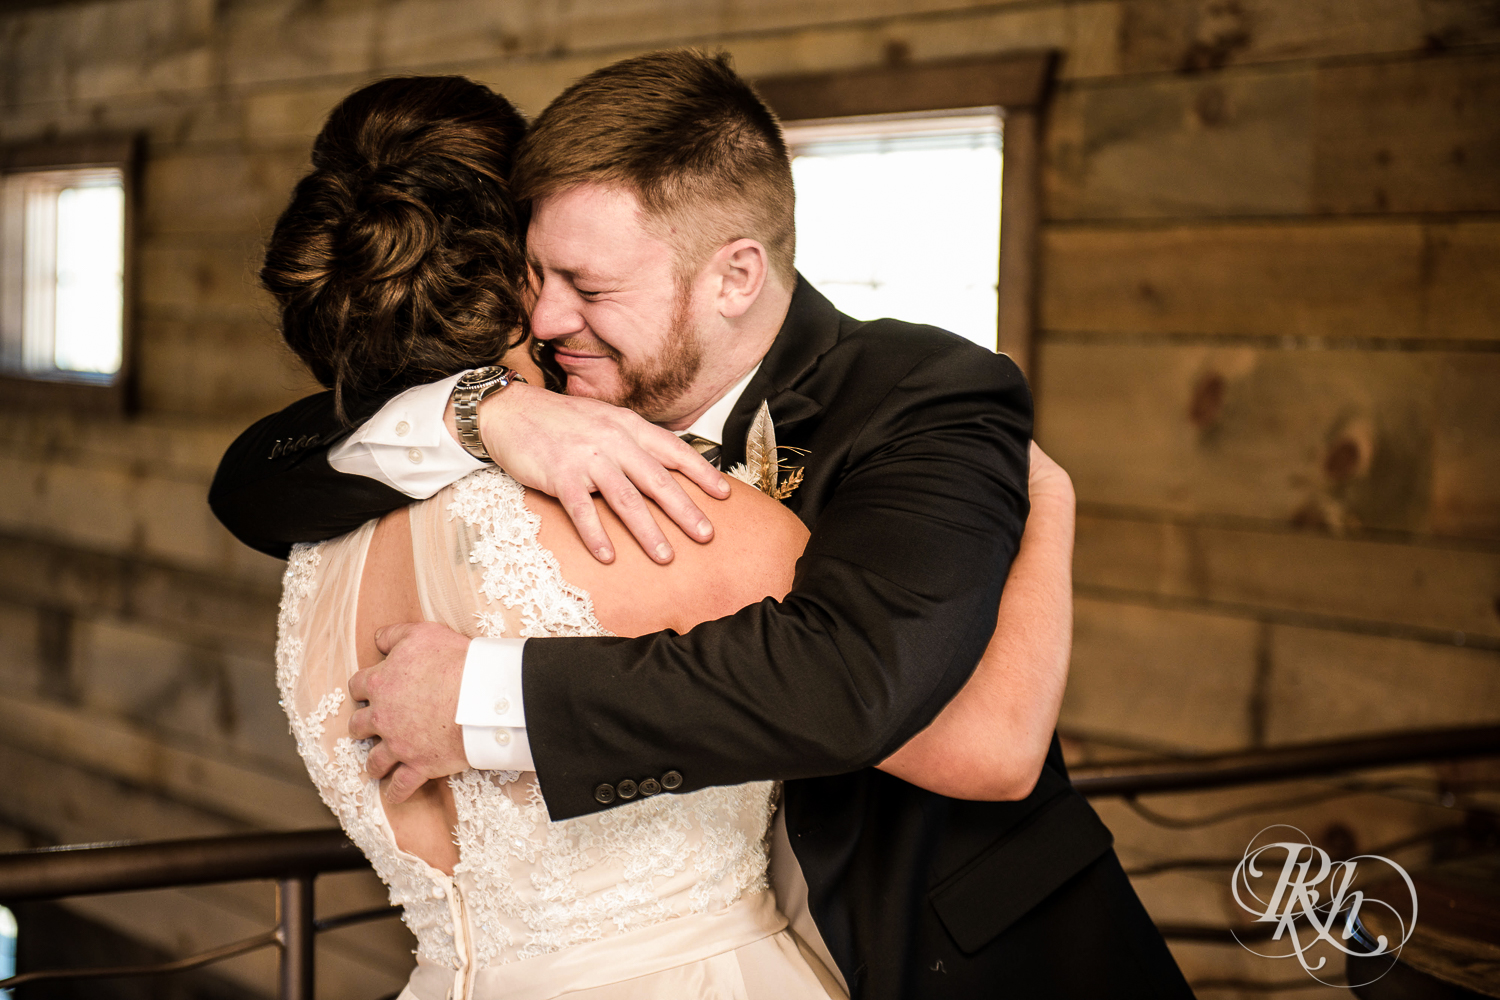 Groom cries during first look before wedding at Creekside Farm in Rush City, Minnesota.